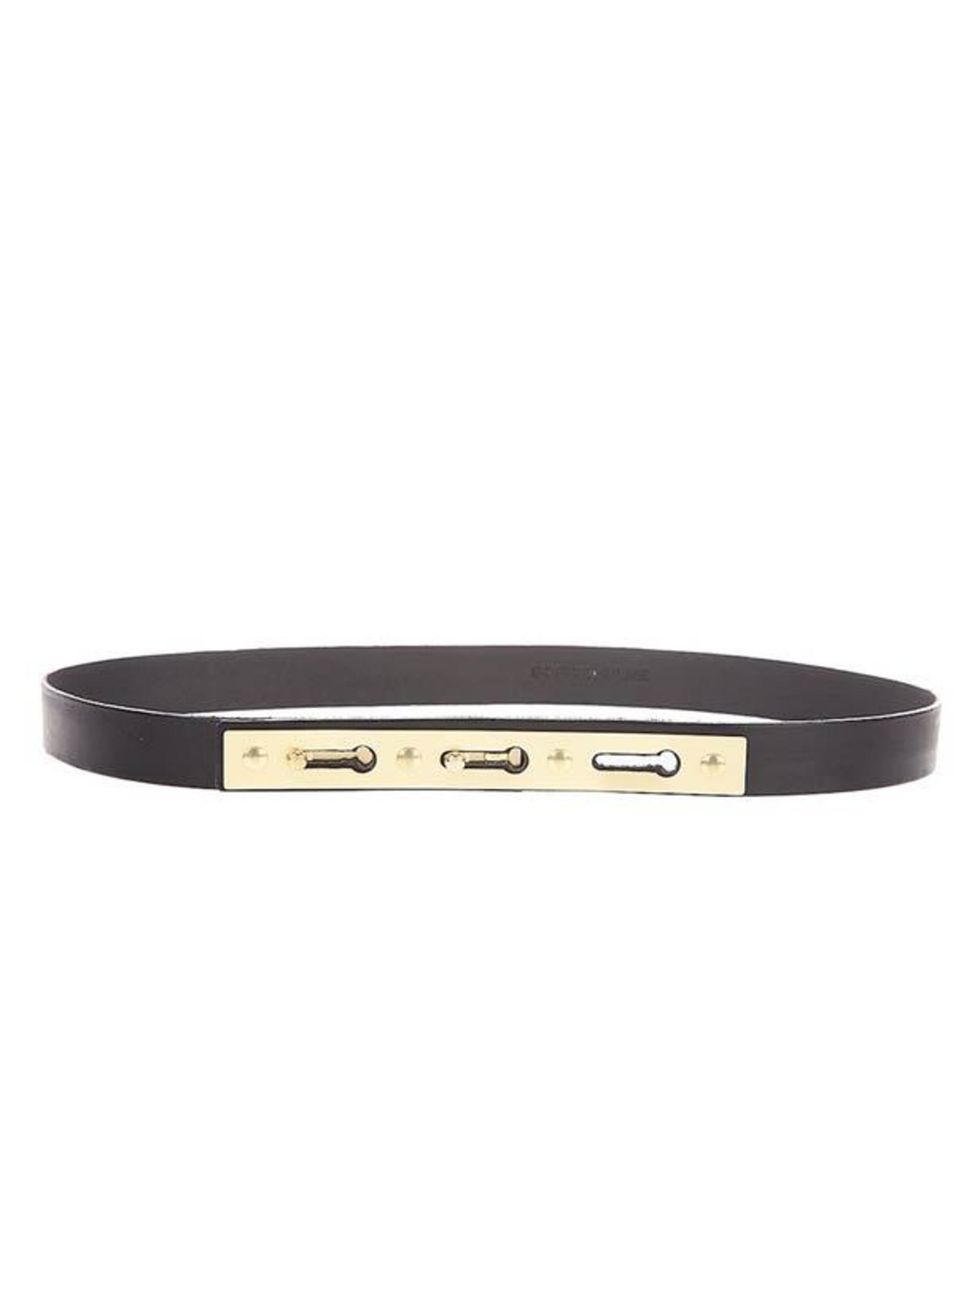 <p>Sophie Hulme can do no wrong. Strong, minimalist pieces like this belt go with everything and add a luxe hit to any look.... Sophie Hulme brass plated belt, £99, at <a href="http://www.bstorelondon.com/shopping/women/item10072535.aspx">b Store</a></p>